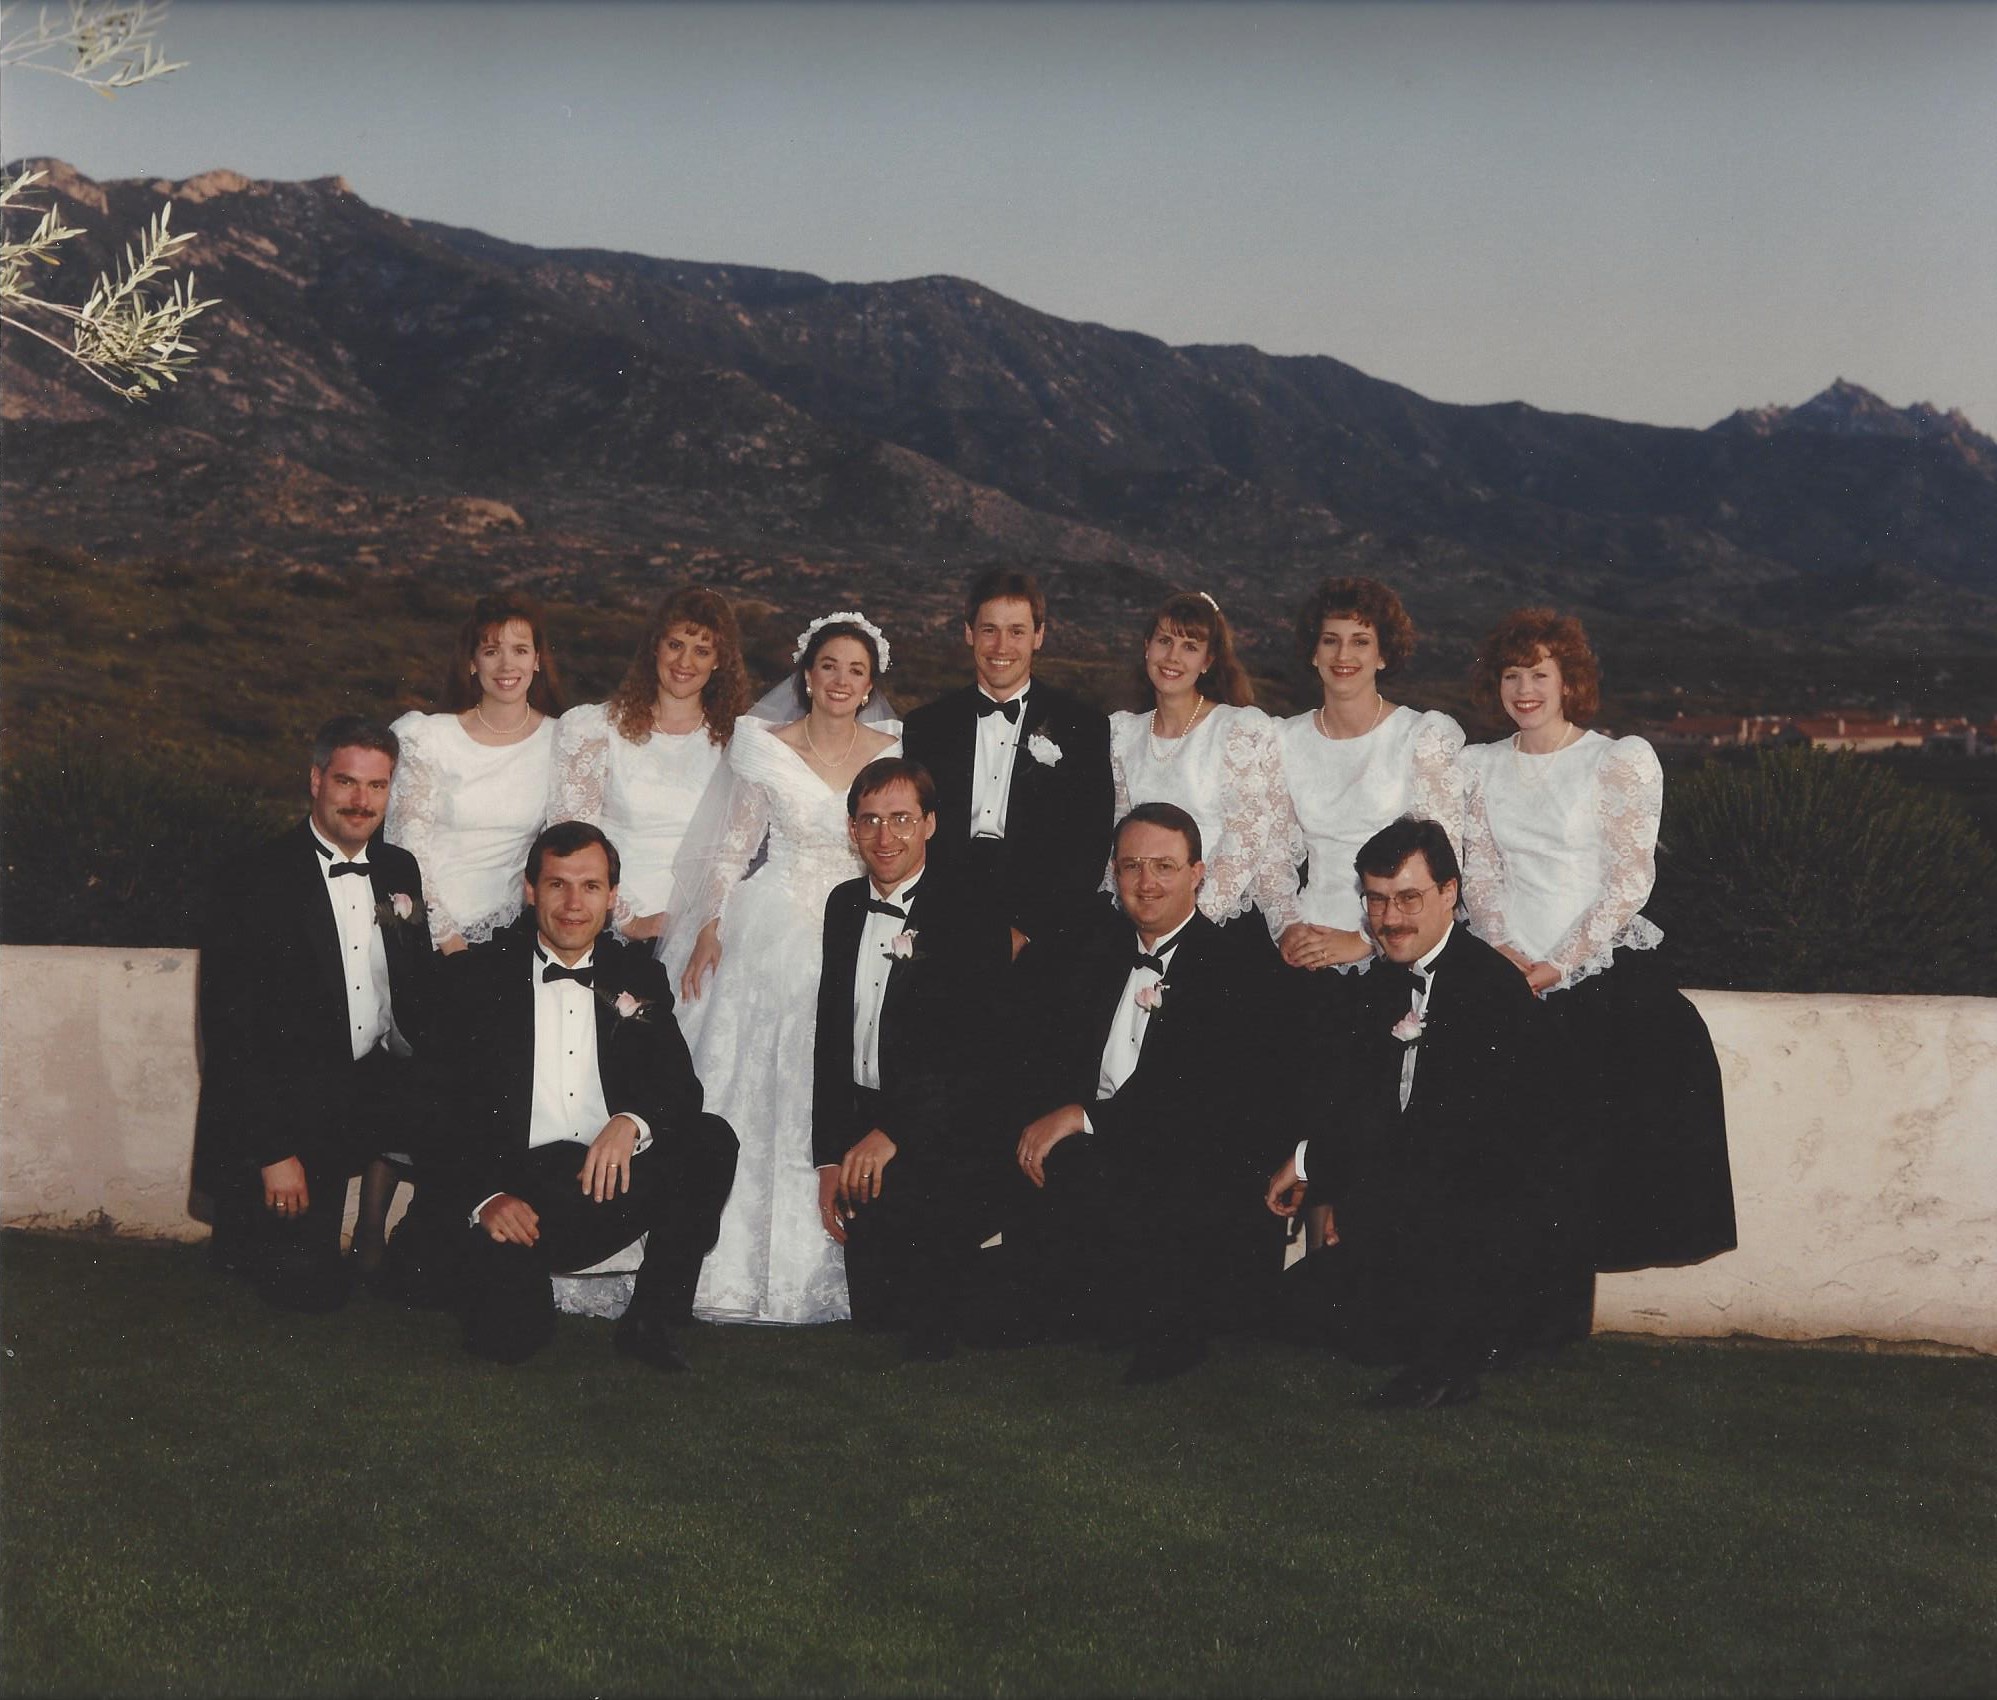 TWedding party with mountains as background